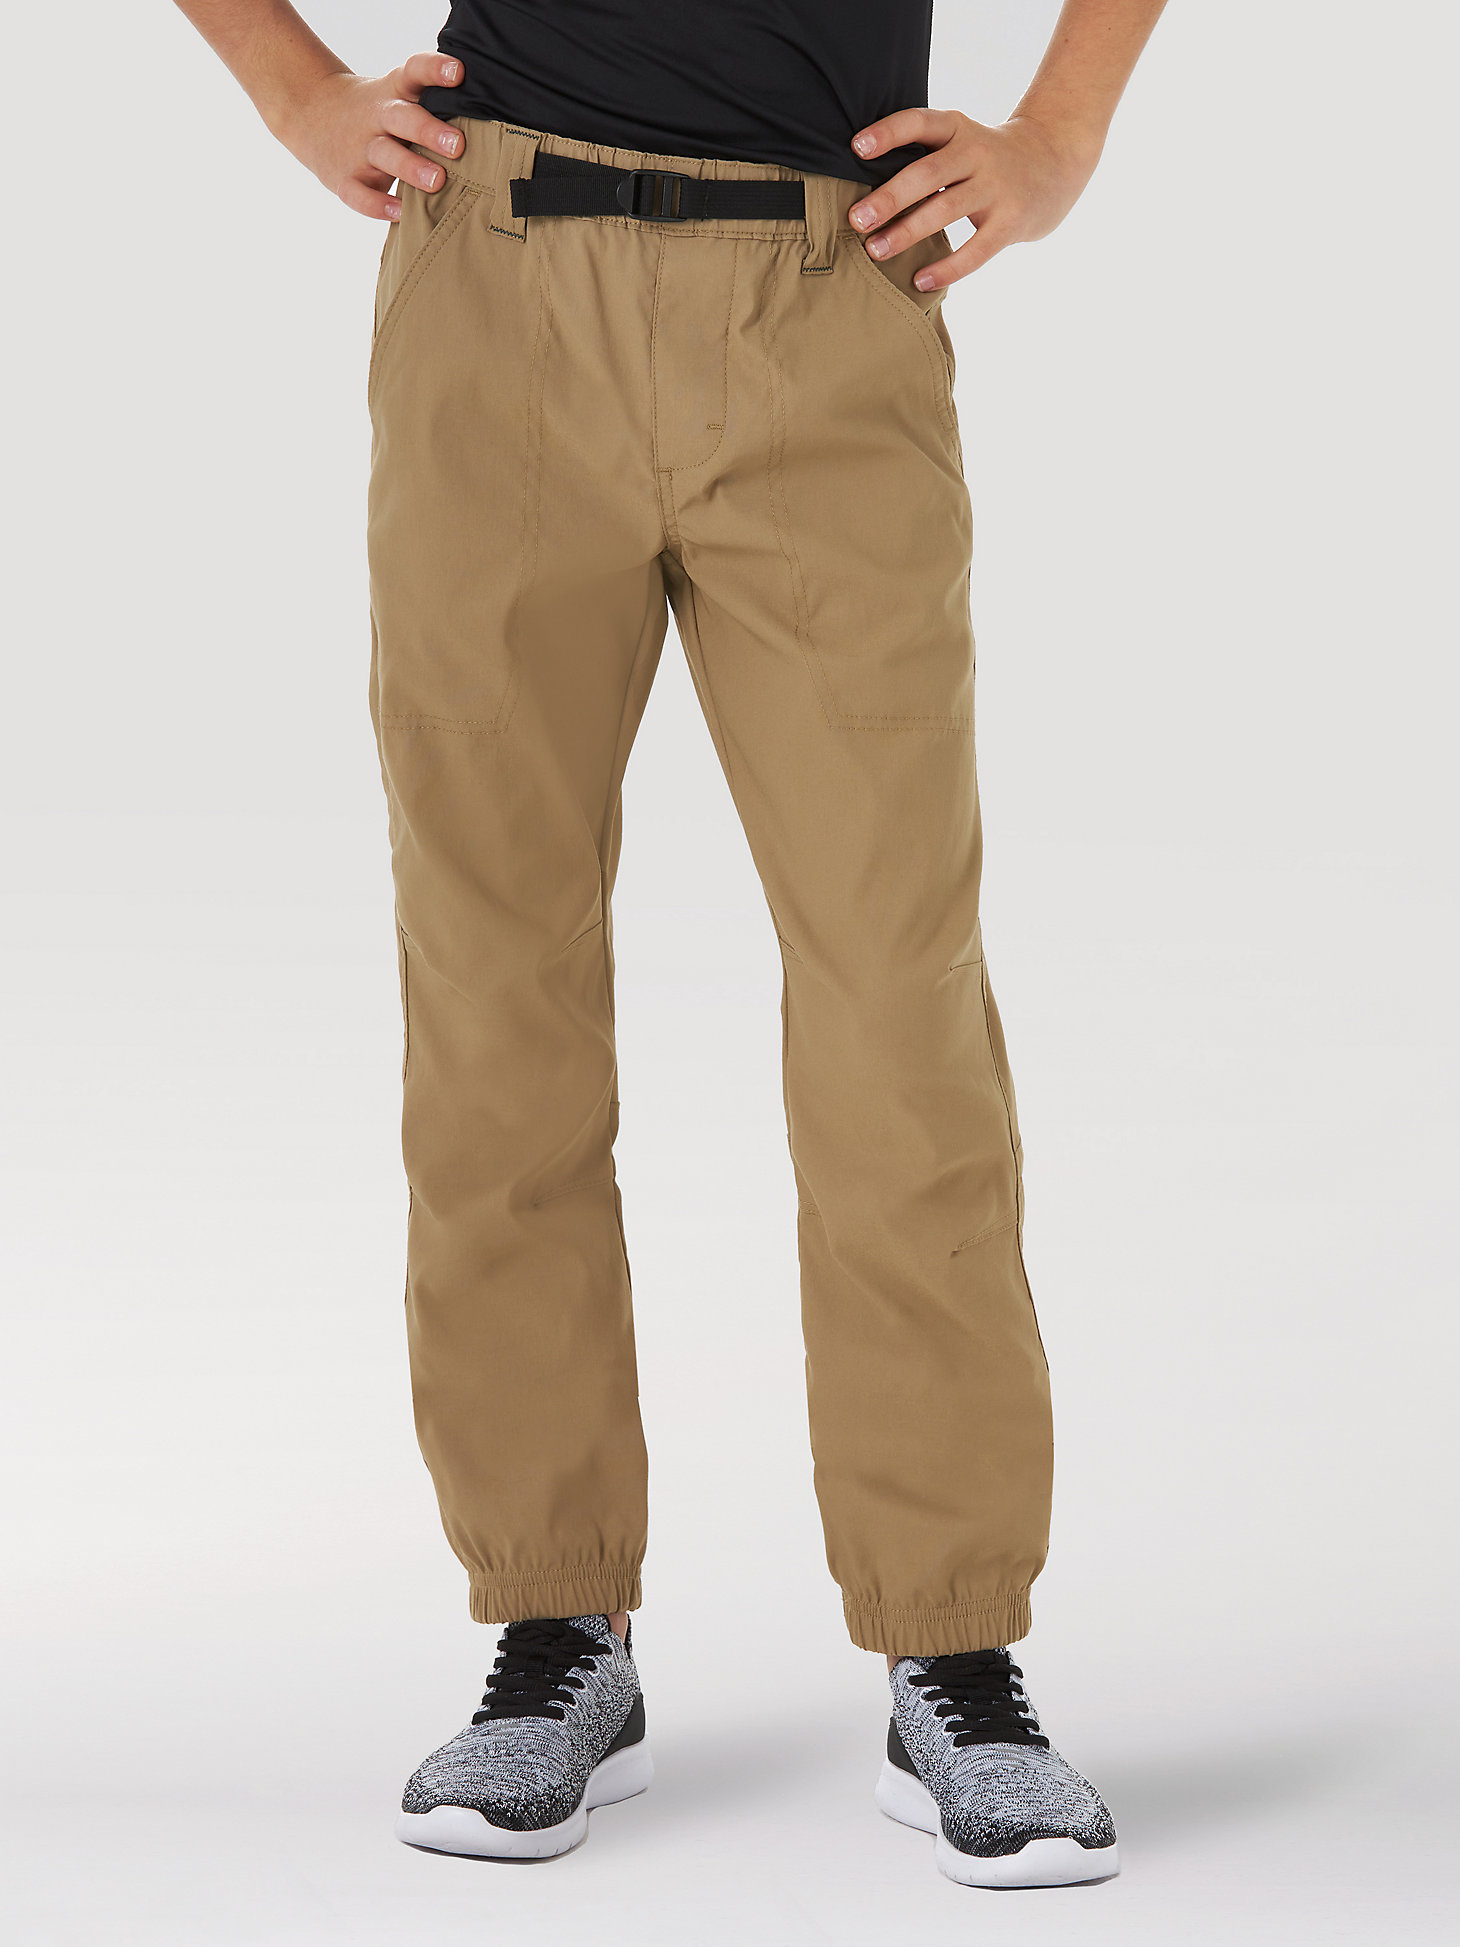 Boy's Wrangler® Outdoor Stretch Synthetic Pant in Petrified Oak main view